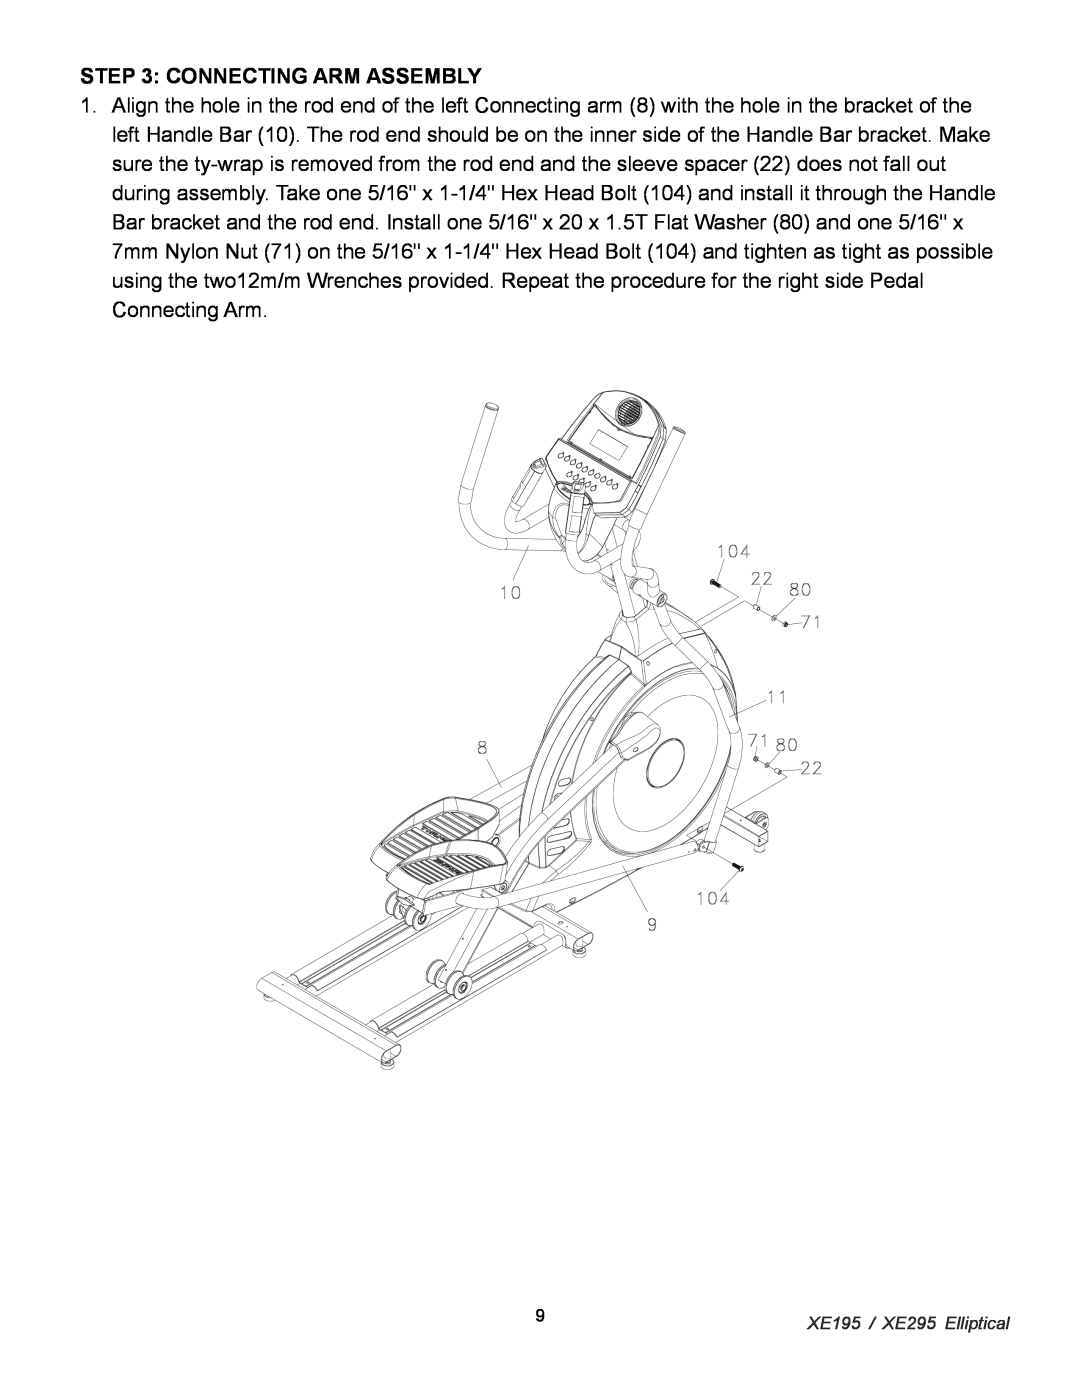 Spirit XE 295, XE 195 owner manual Connecting Arm Assembly 